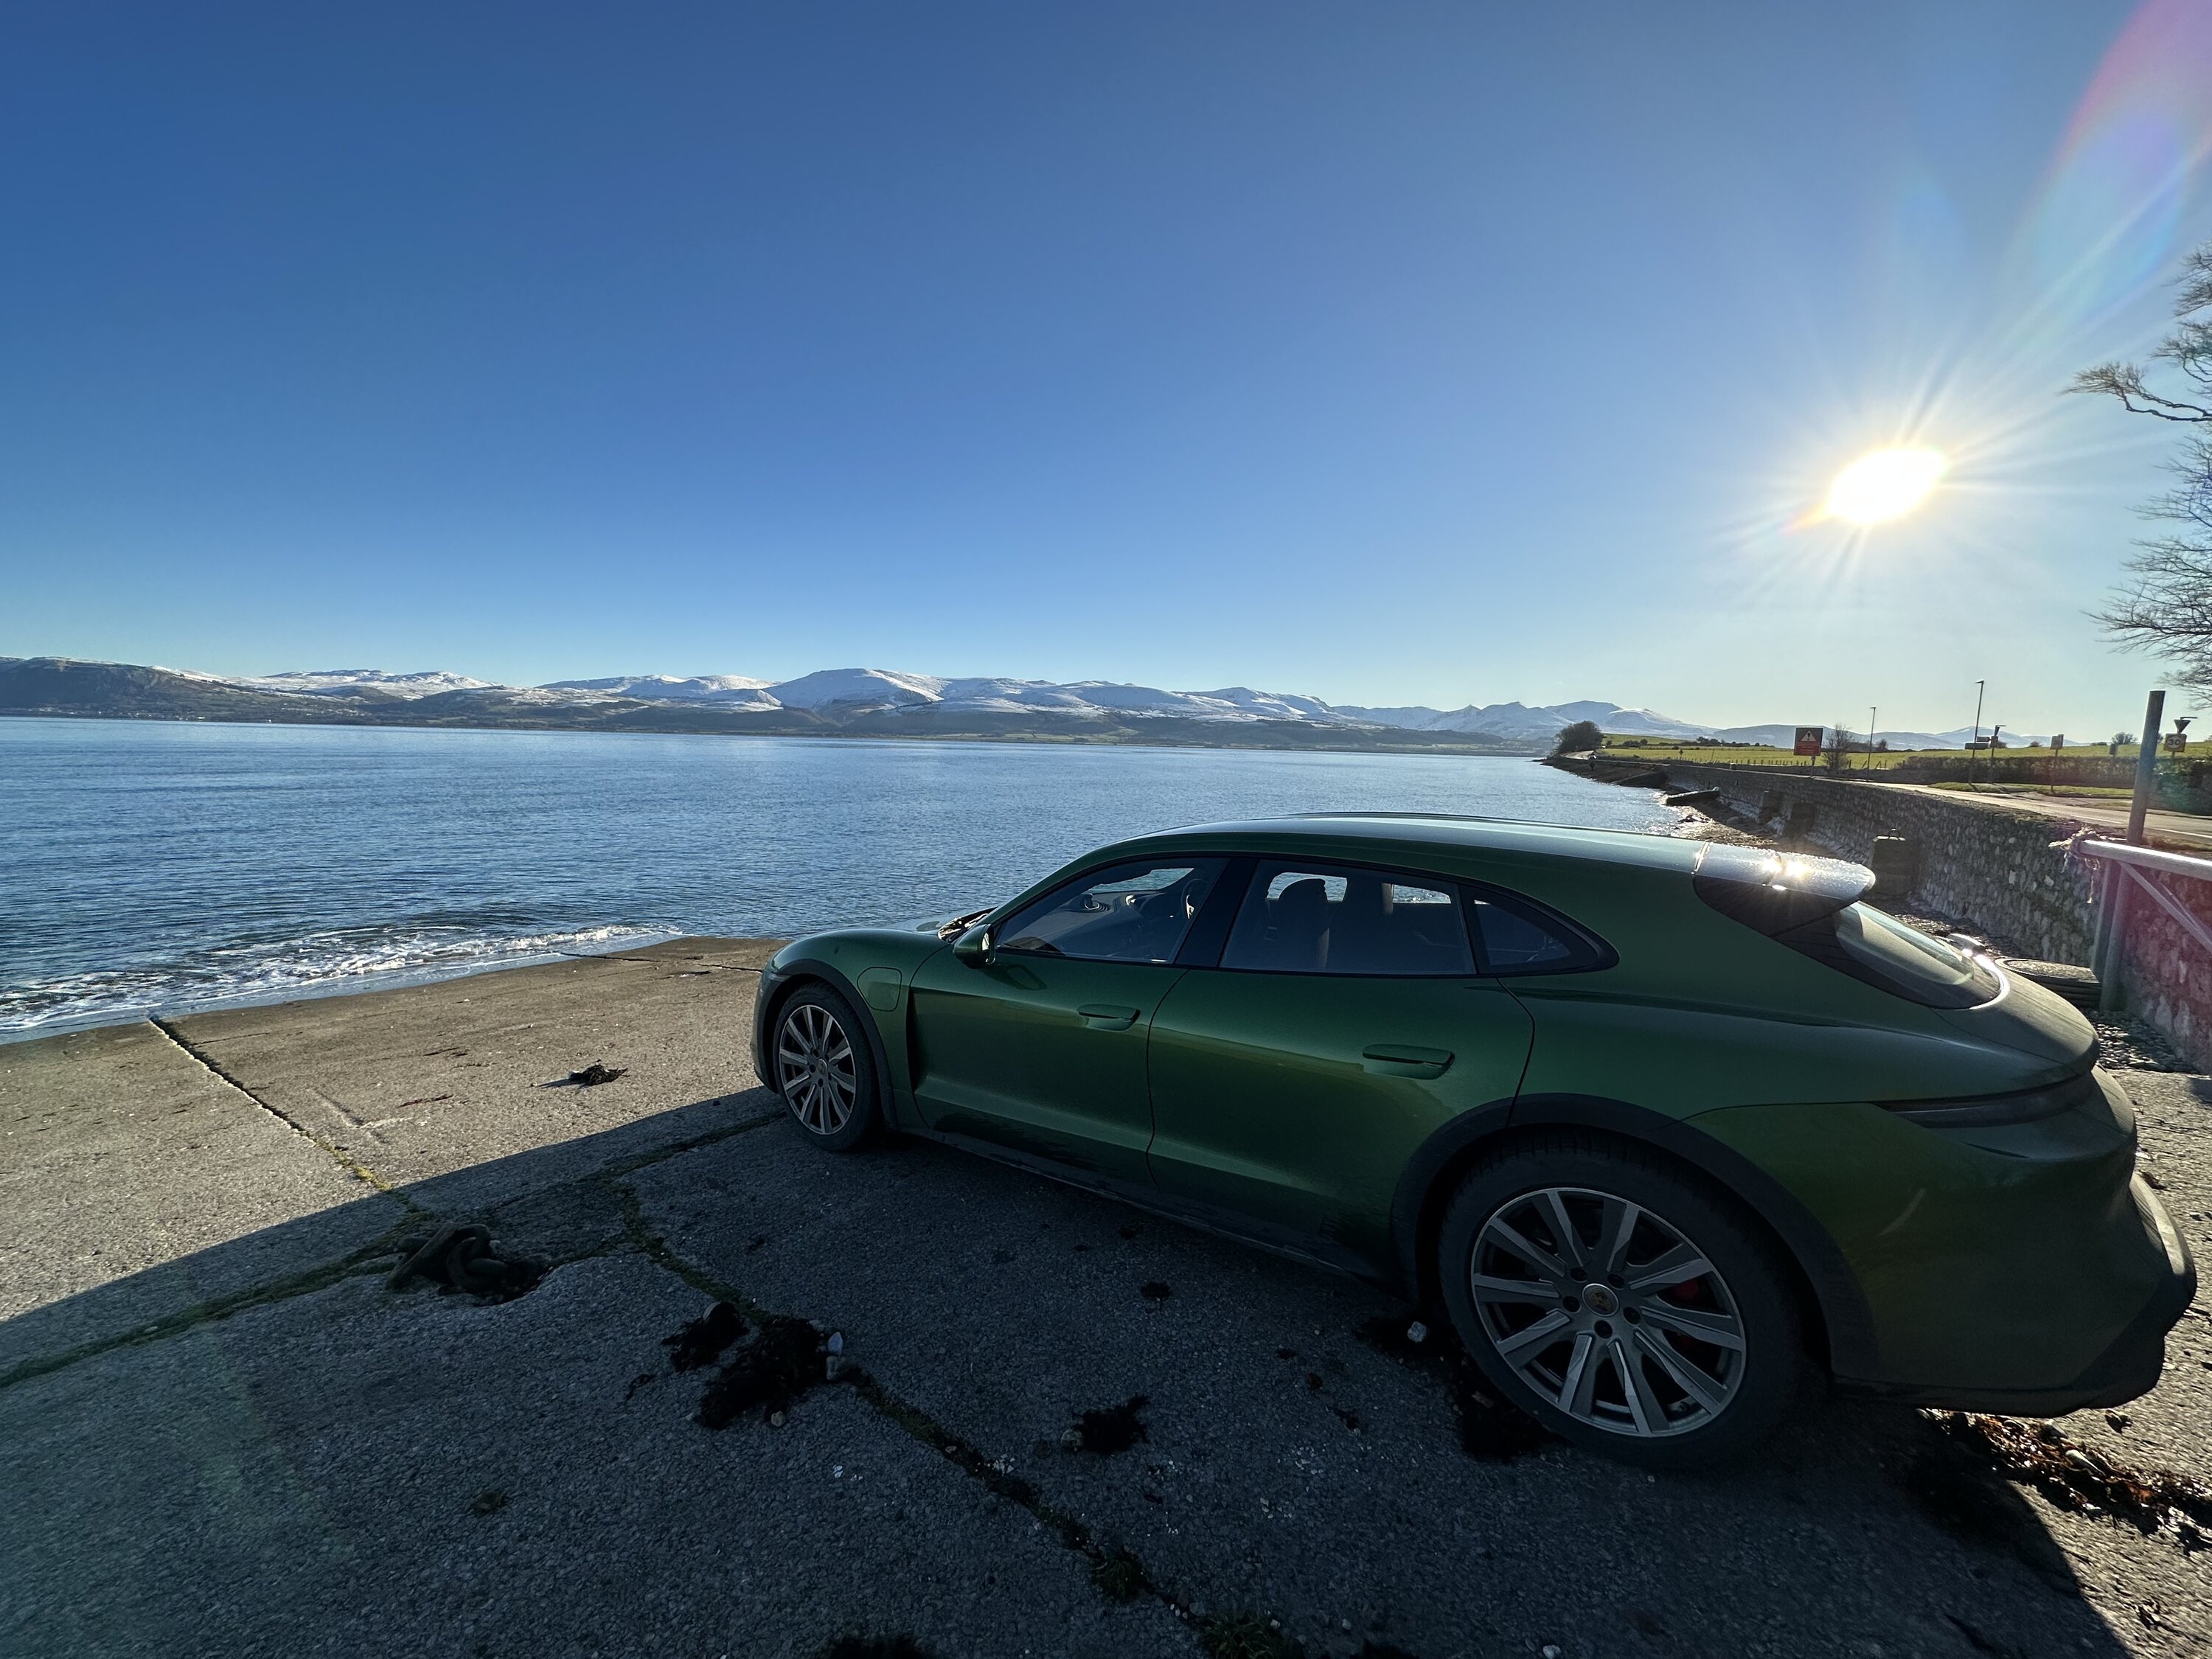 Porsche Taycan Location! Location! Location!  Post Artistic Photos of Your Taycan with Scenery 53D421B0-B6B8-43A3-A3C7-25C4139BF808